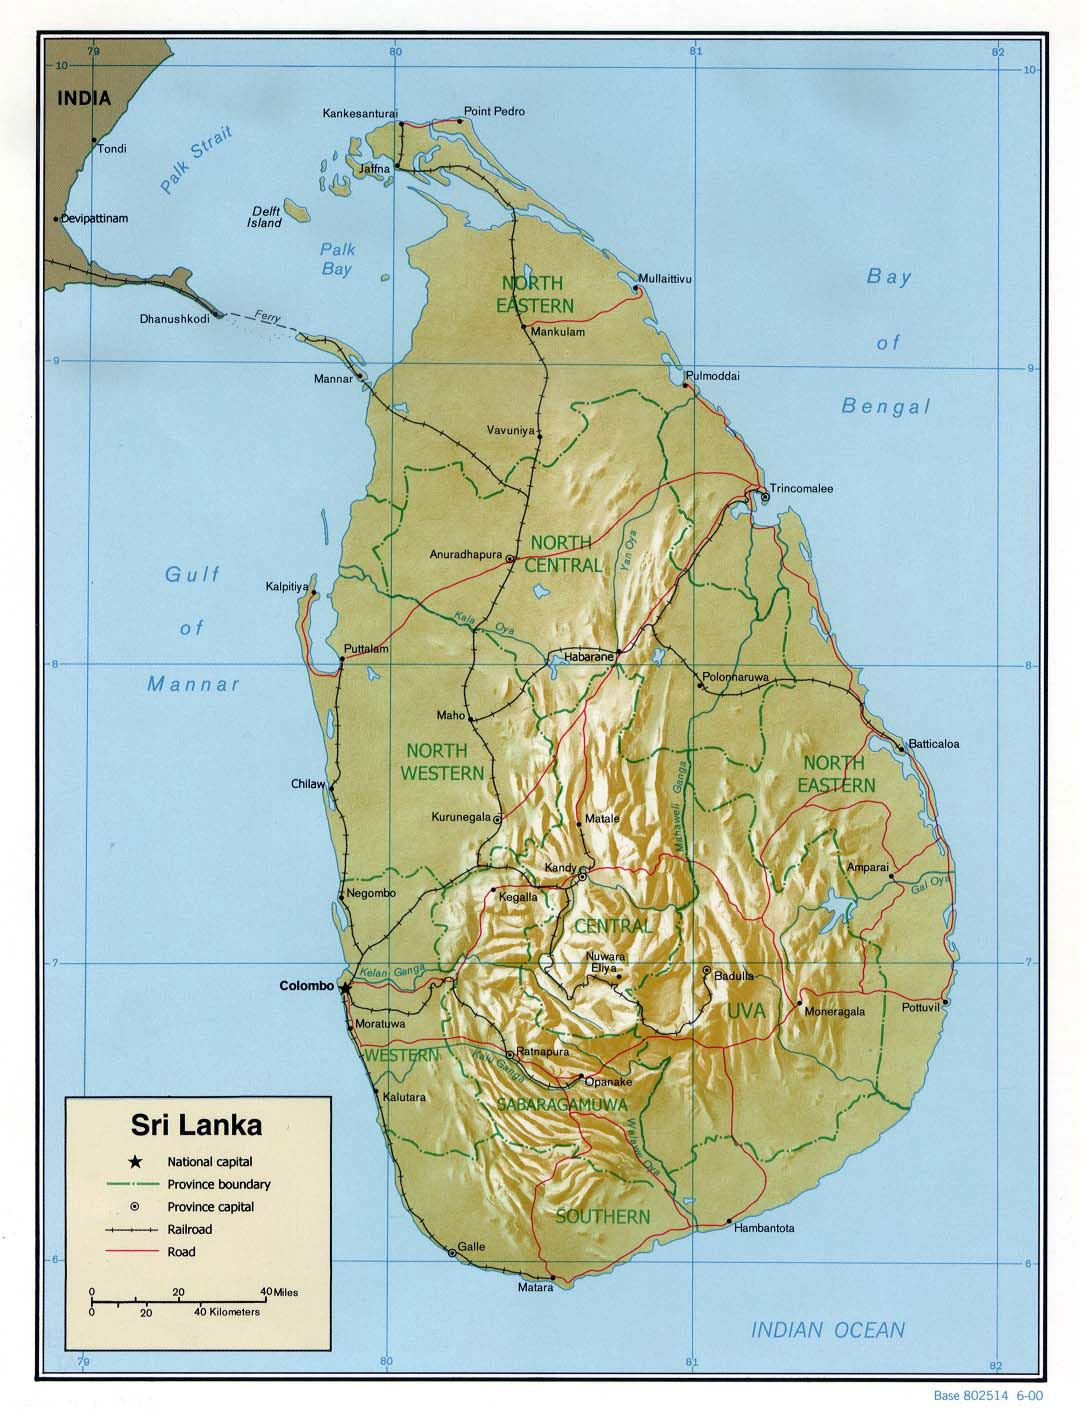 Detailed political and administrative map of Sri Lanka with relief, roads, railroads and major cities - 2000